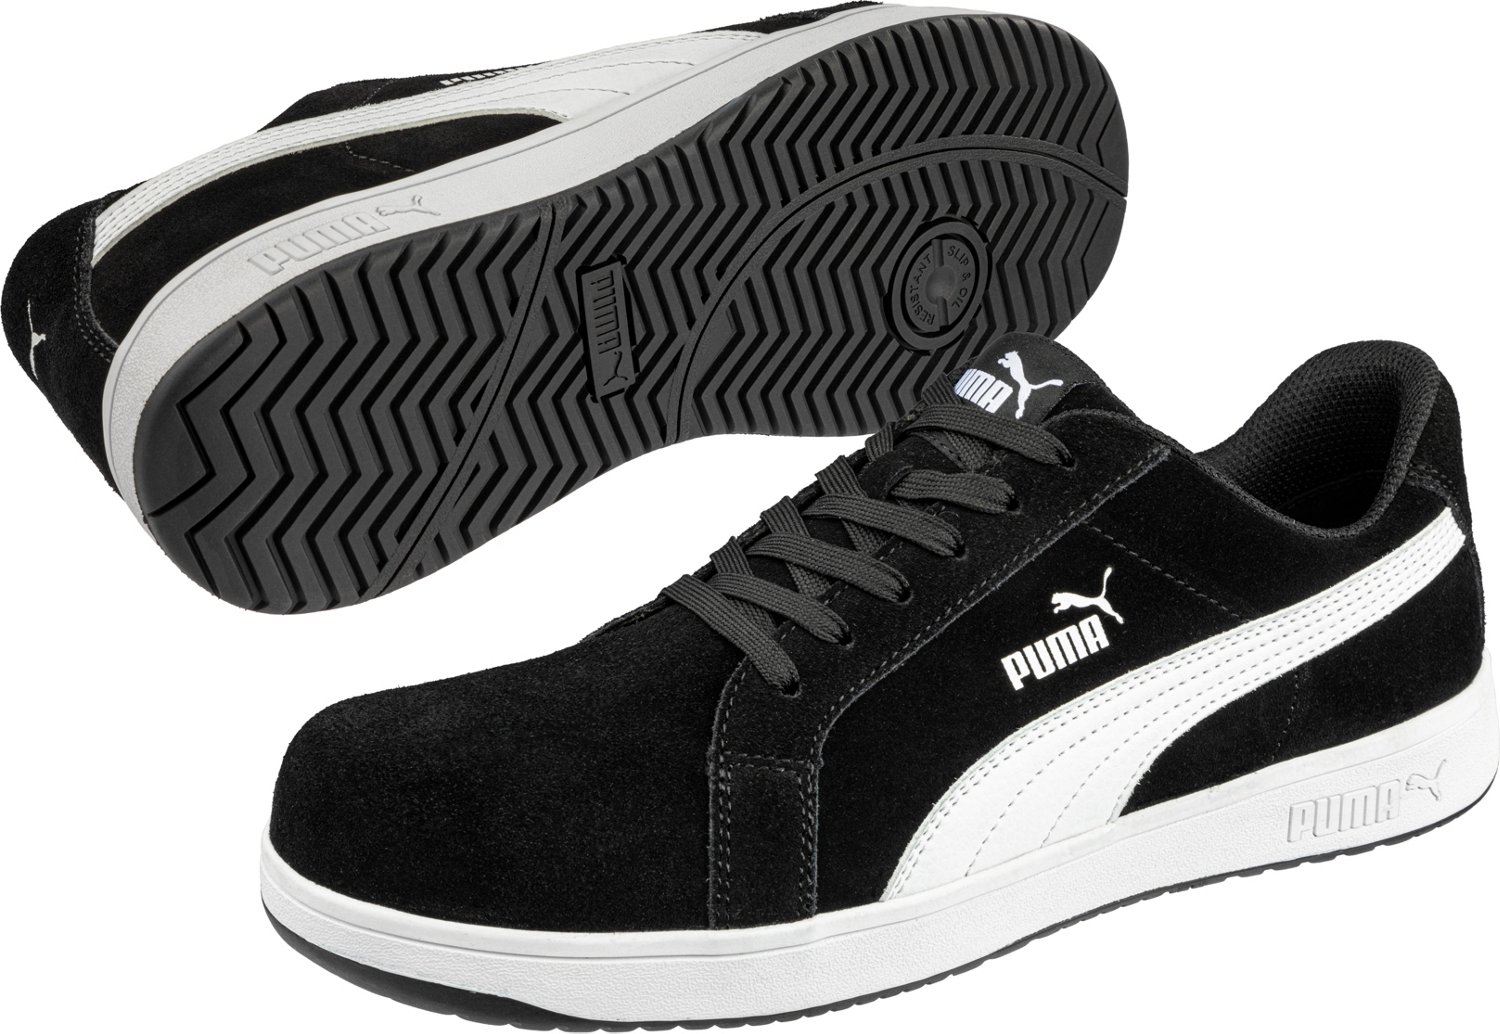 PUMA Men's Safety Classic Heritage Composite Toe Work Boots | Academy